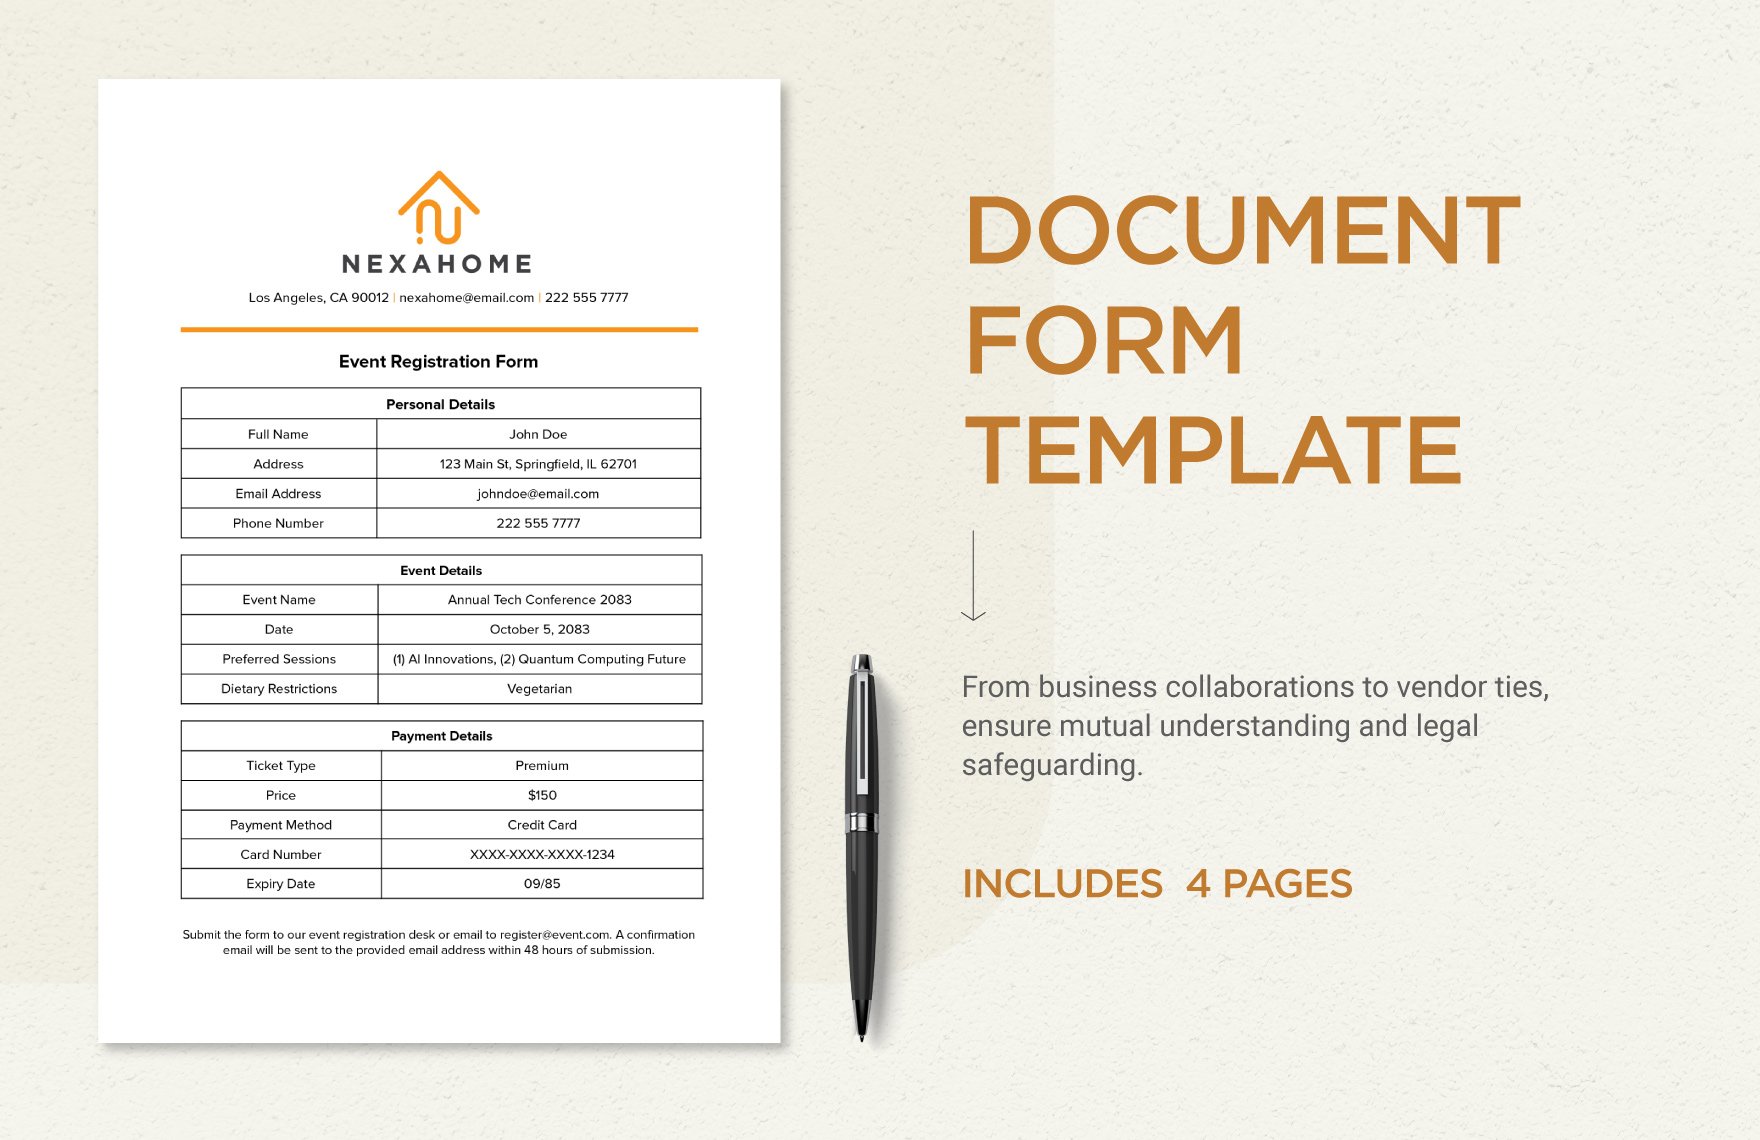 Document Form Template